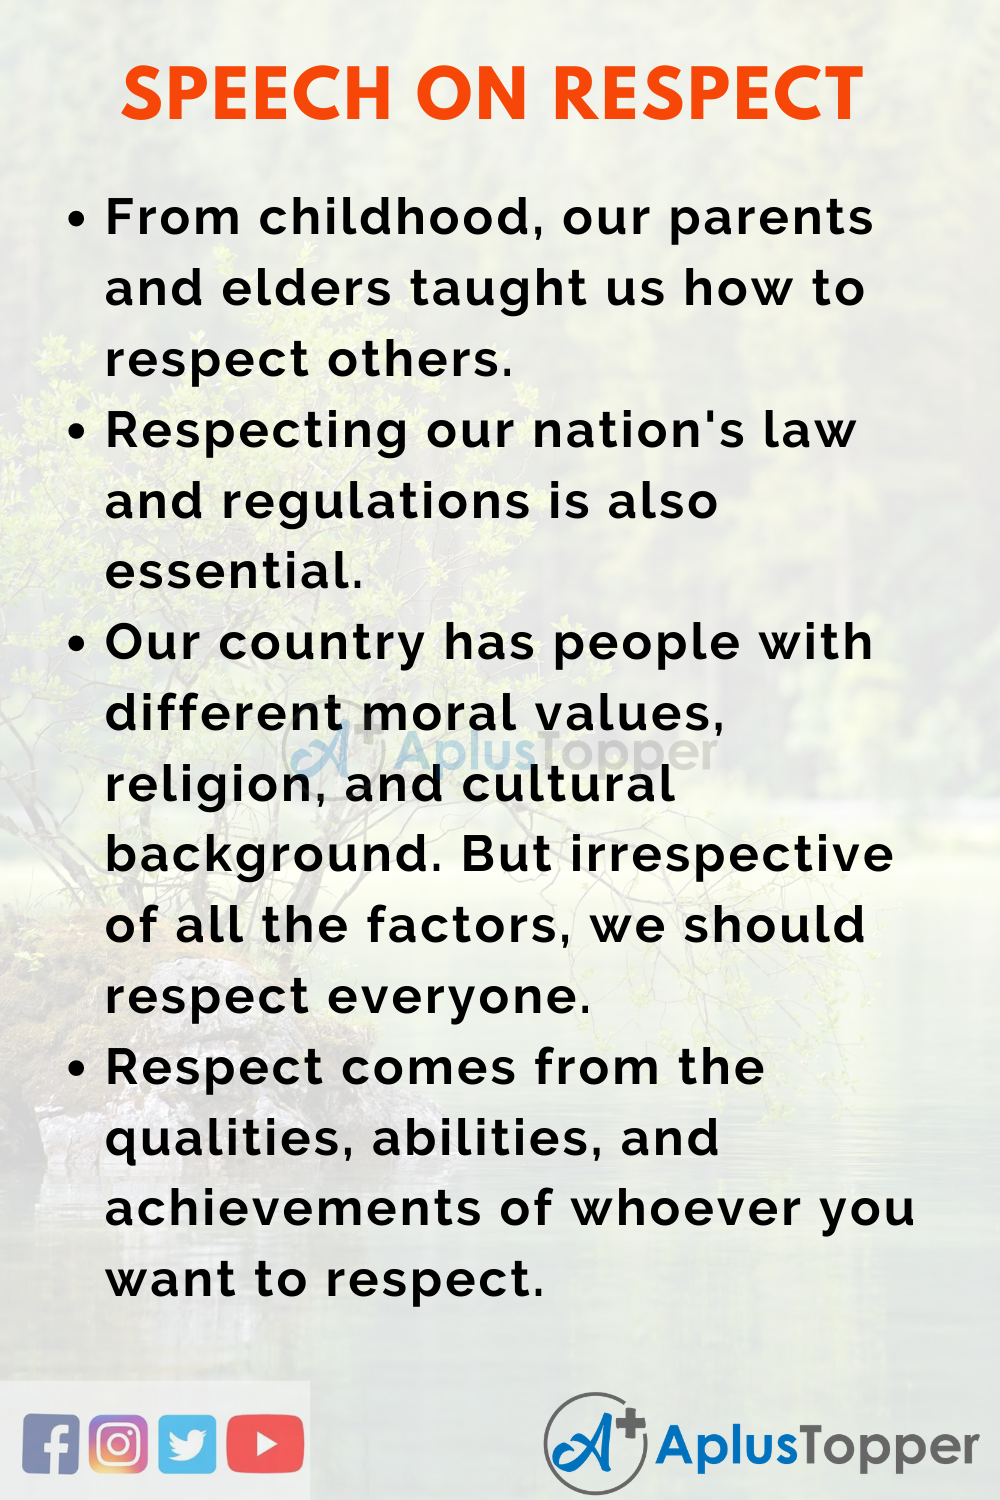 speech on respect for others